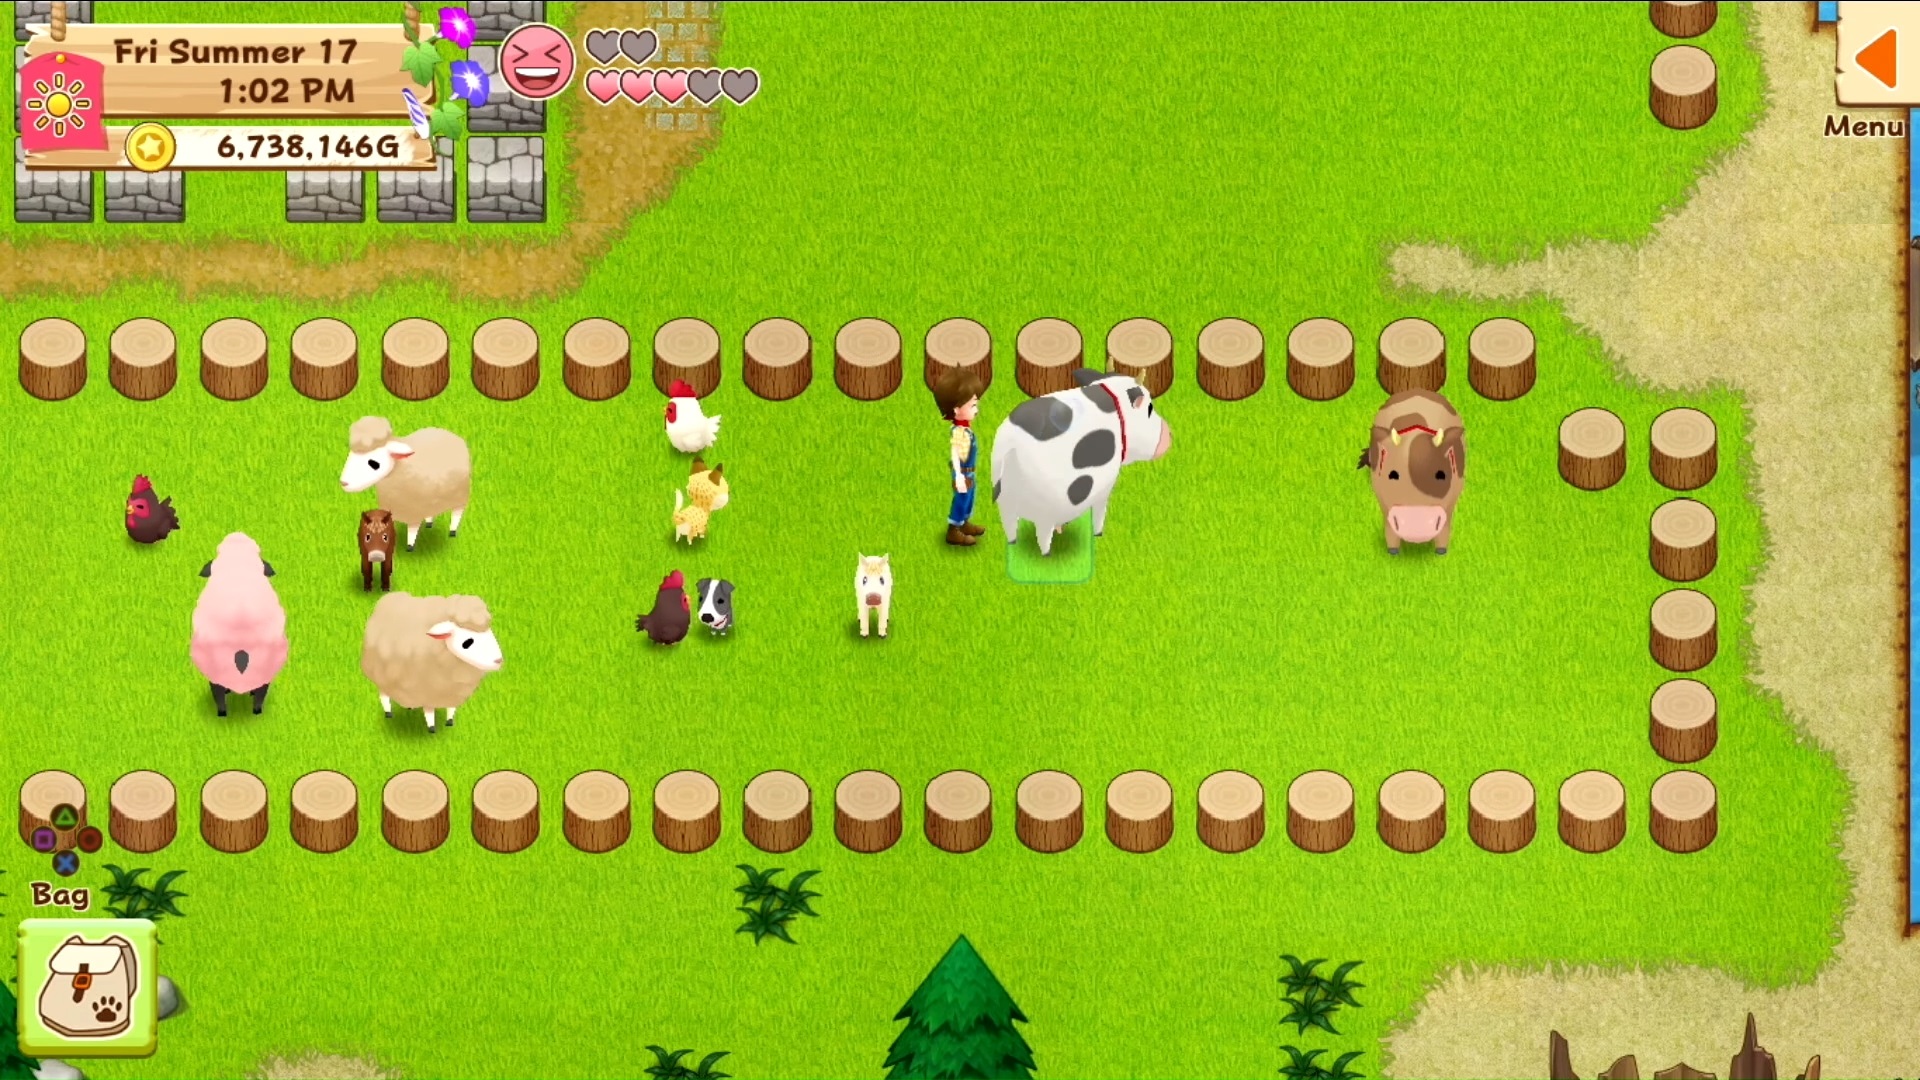 Best farm games - image shows a character standing near a cow in a farm in Harvest Moon: Light of Hope.